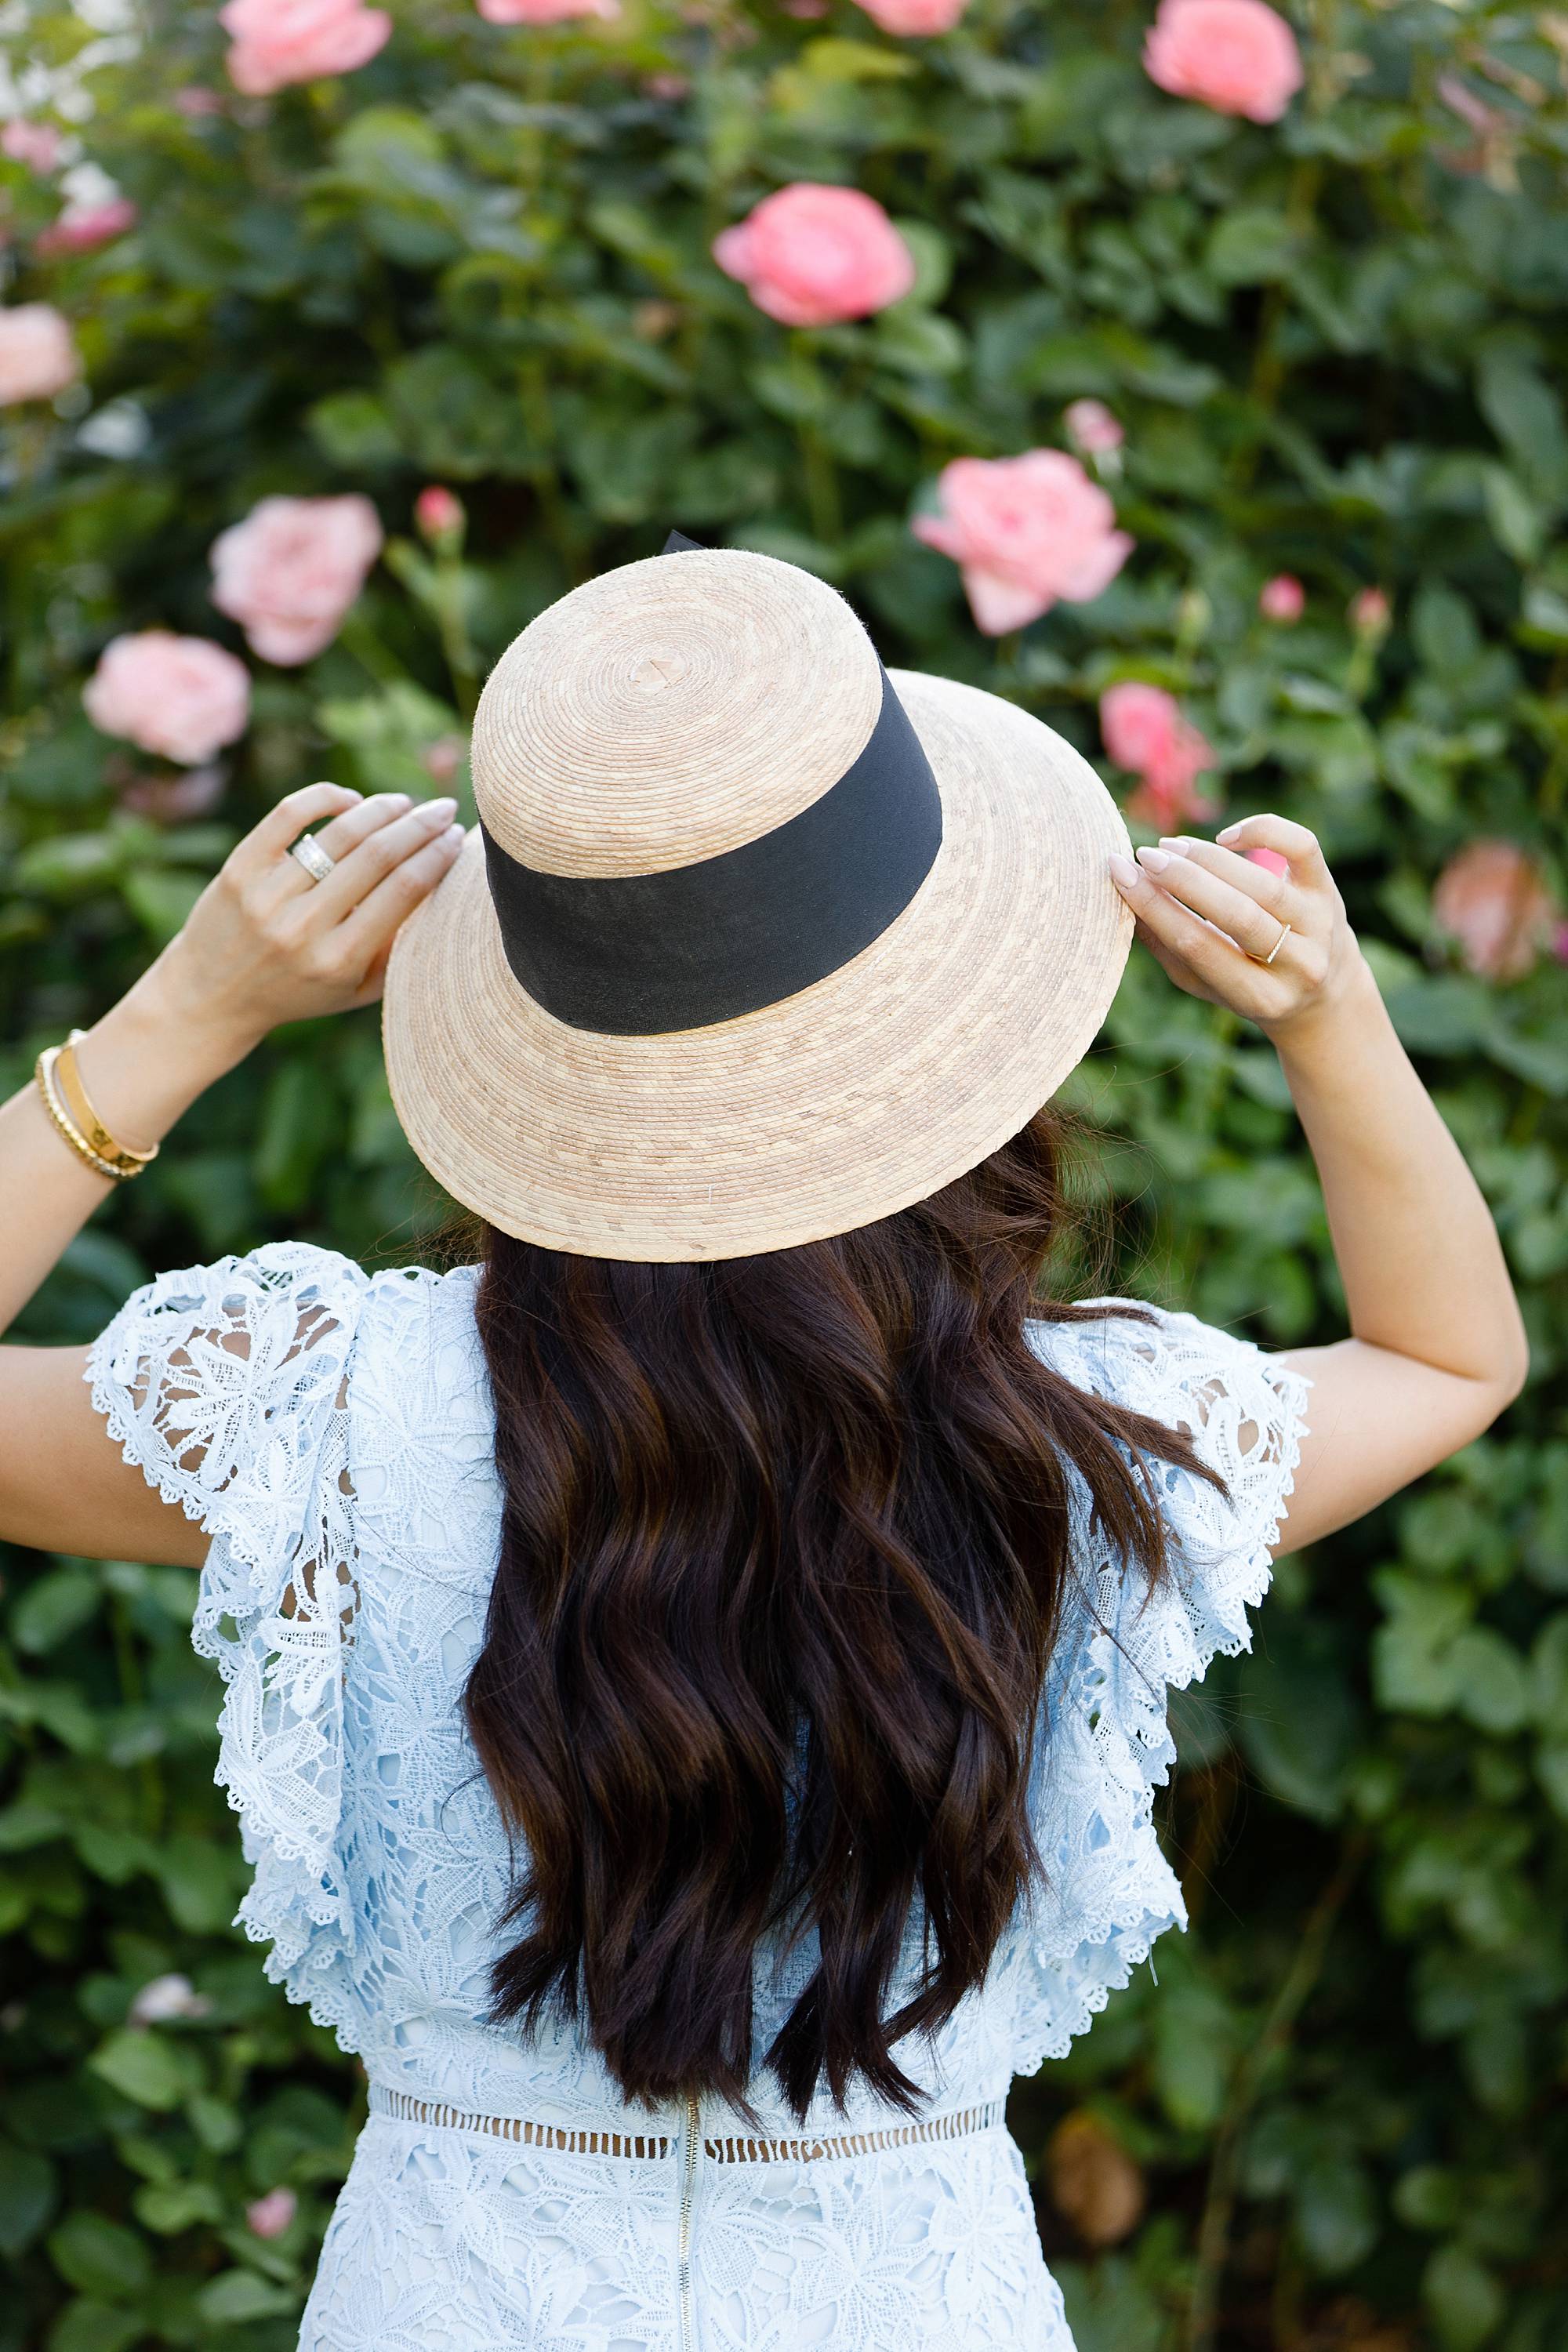 woman hands on hat pose blue lace dress with garden hat from terrain nestled between pink roses against the wall - lifestyle blogger Diana Elizabeth phoenix scottsdale arizona